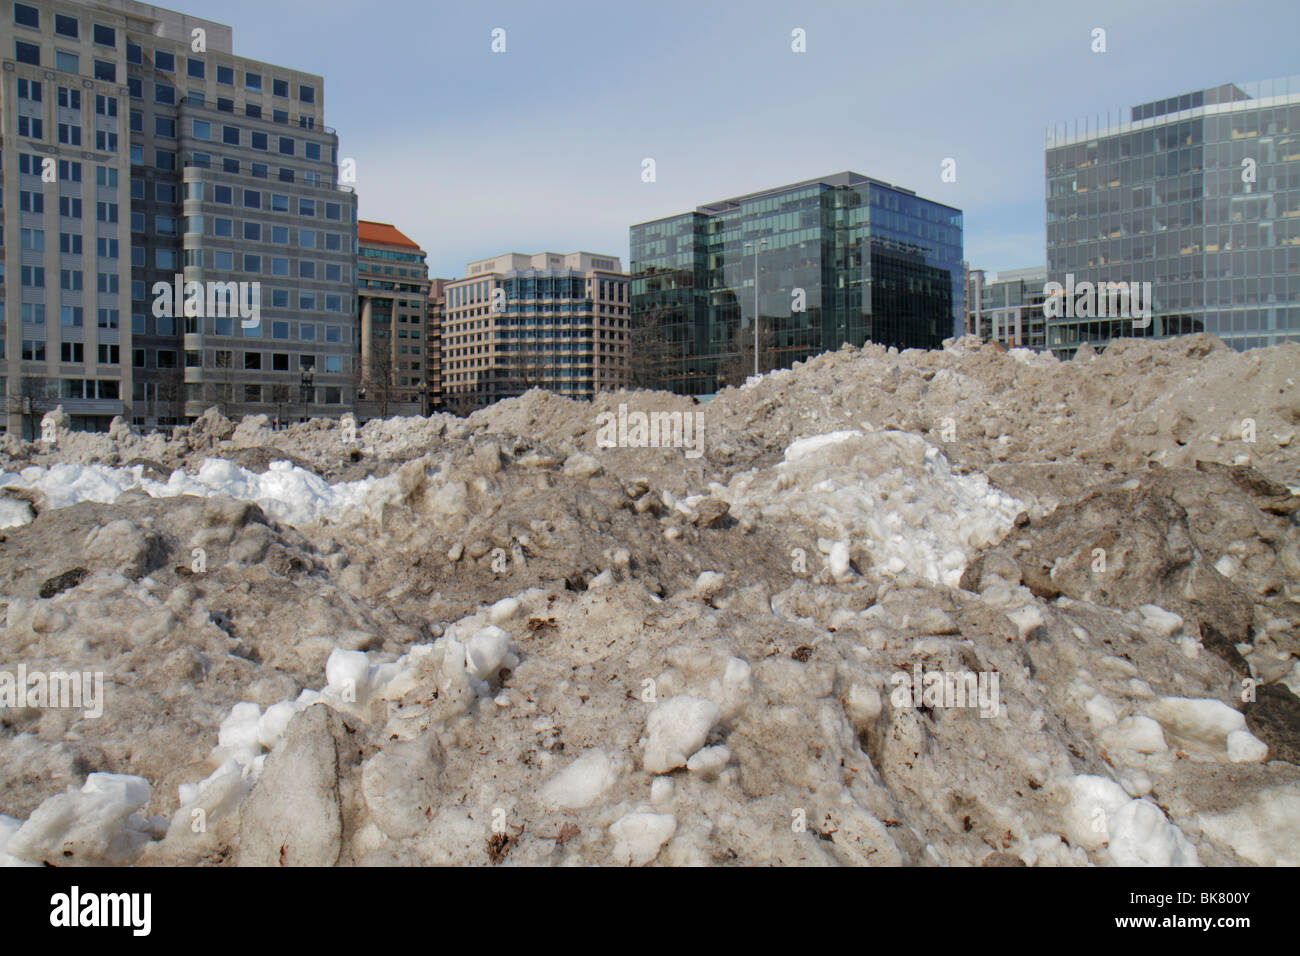 Washington DC,10th Street NW,dirty,grimy,snow,plowed,ice,thawing,melting,wet,pollution,winter,cold,weather,parking lot,office buildings,city skyline,p Stock Photo